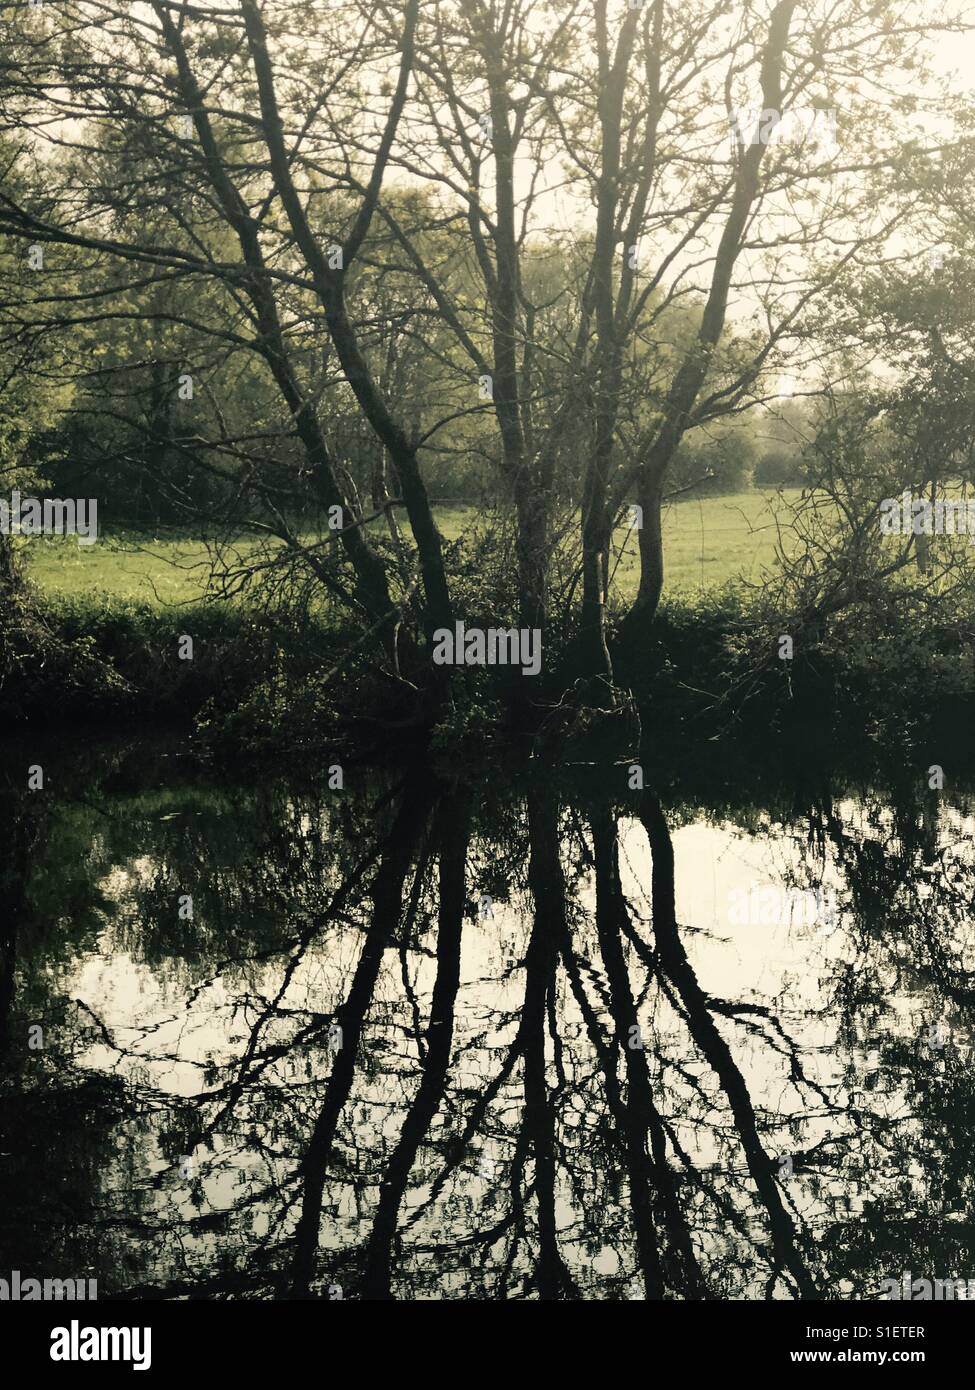 Peaceful reflection and tranquility by the river bank In the countryside. Rural Simplicity. Stock Photo